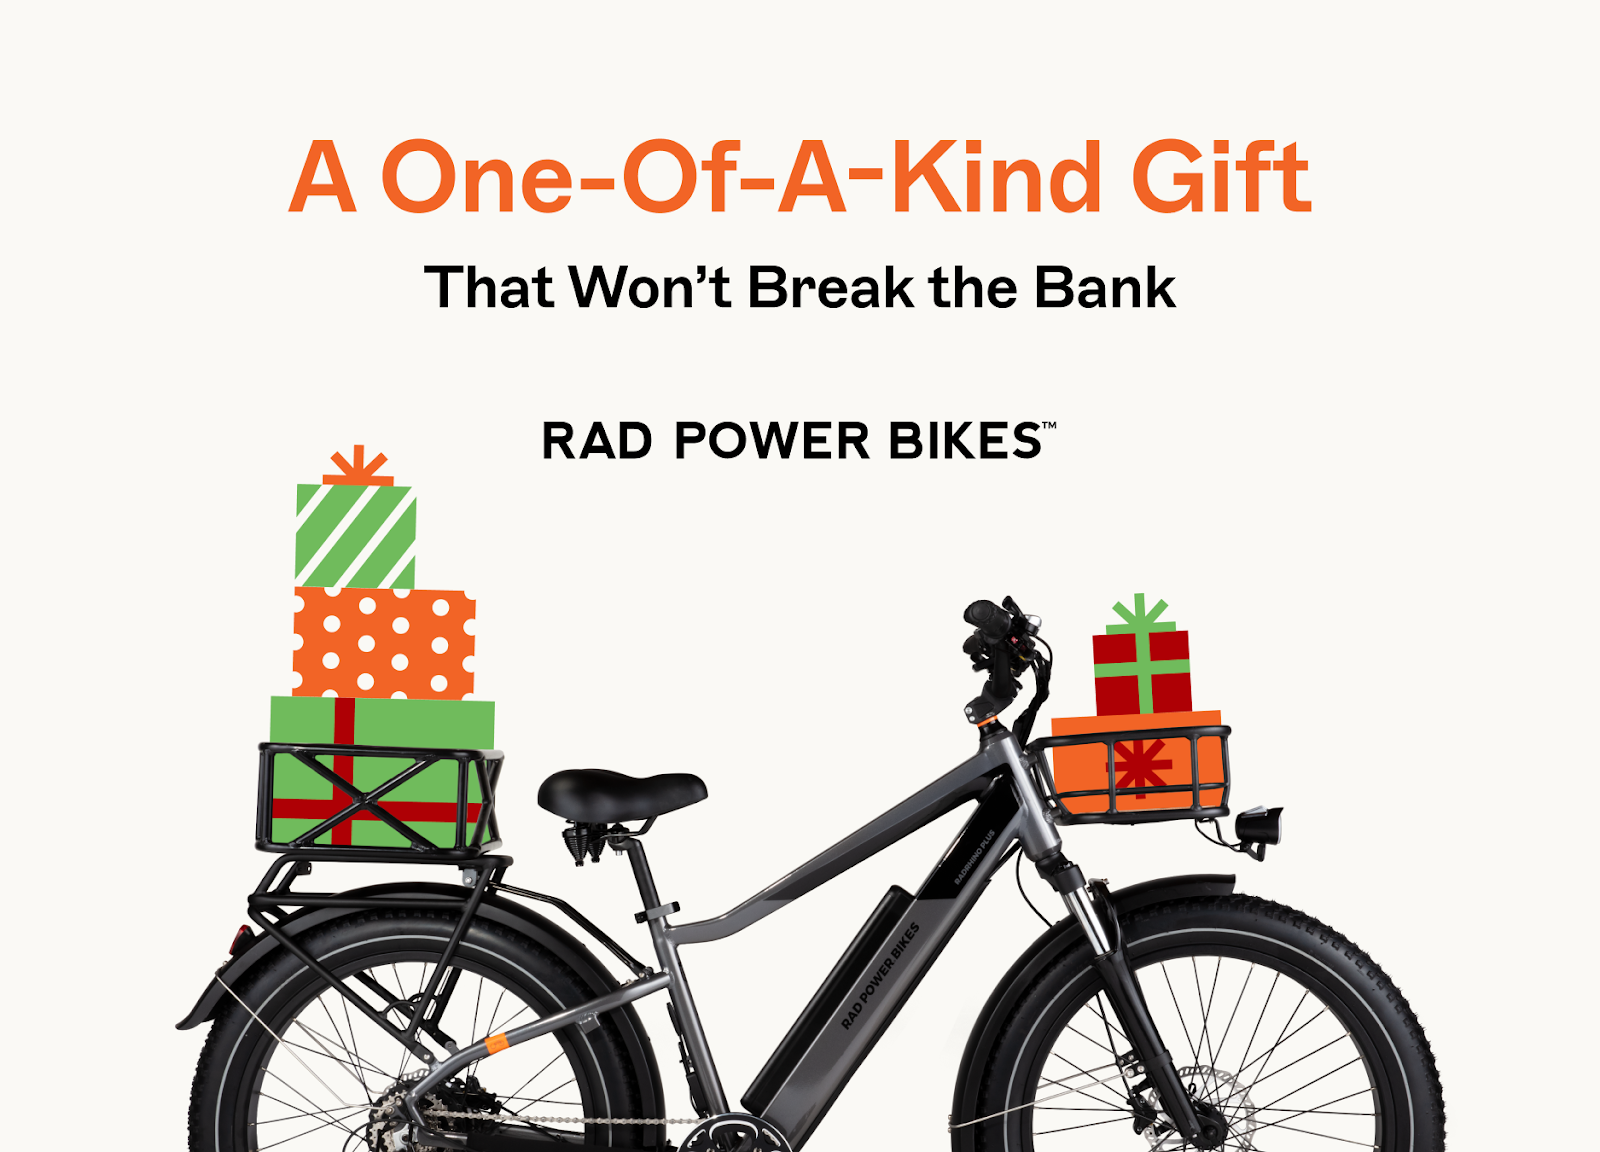 Bike with holiday gifts for programmatic direct mail advertisement 